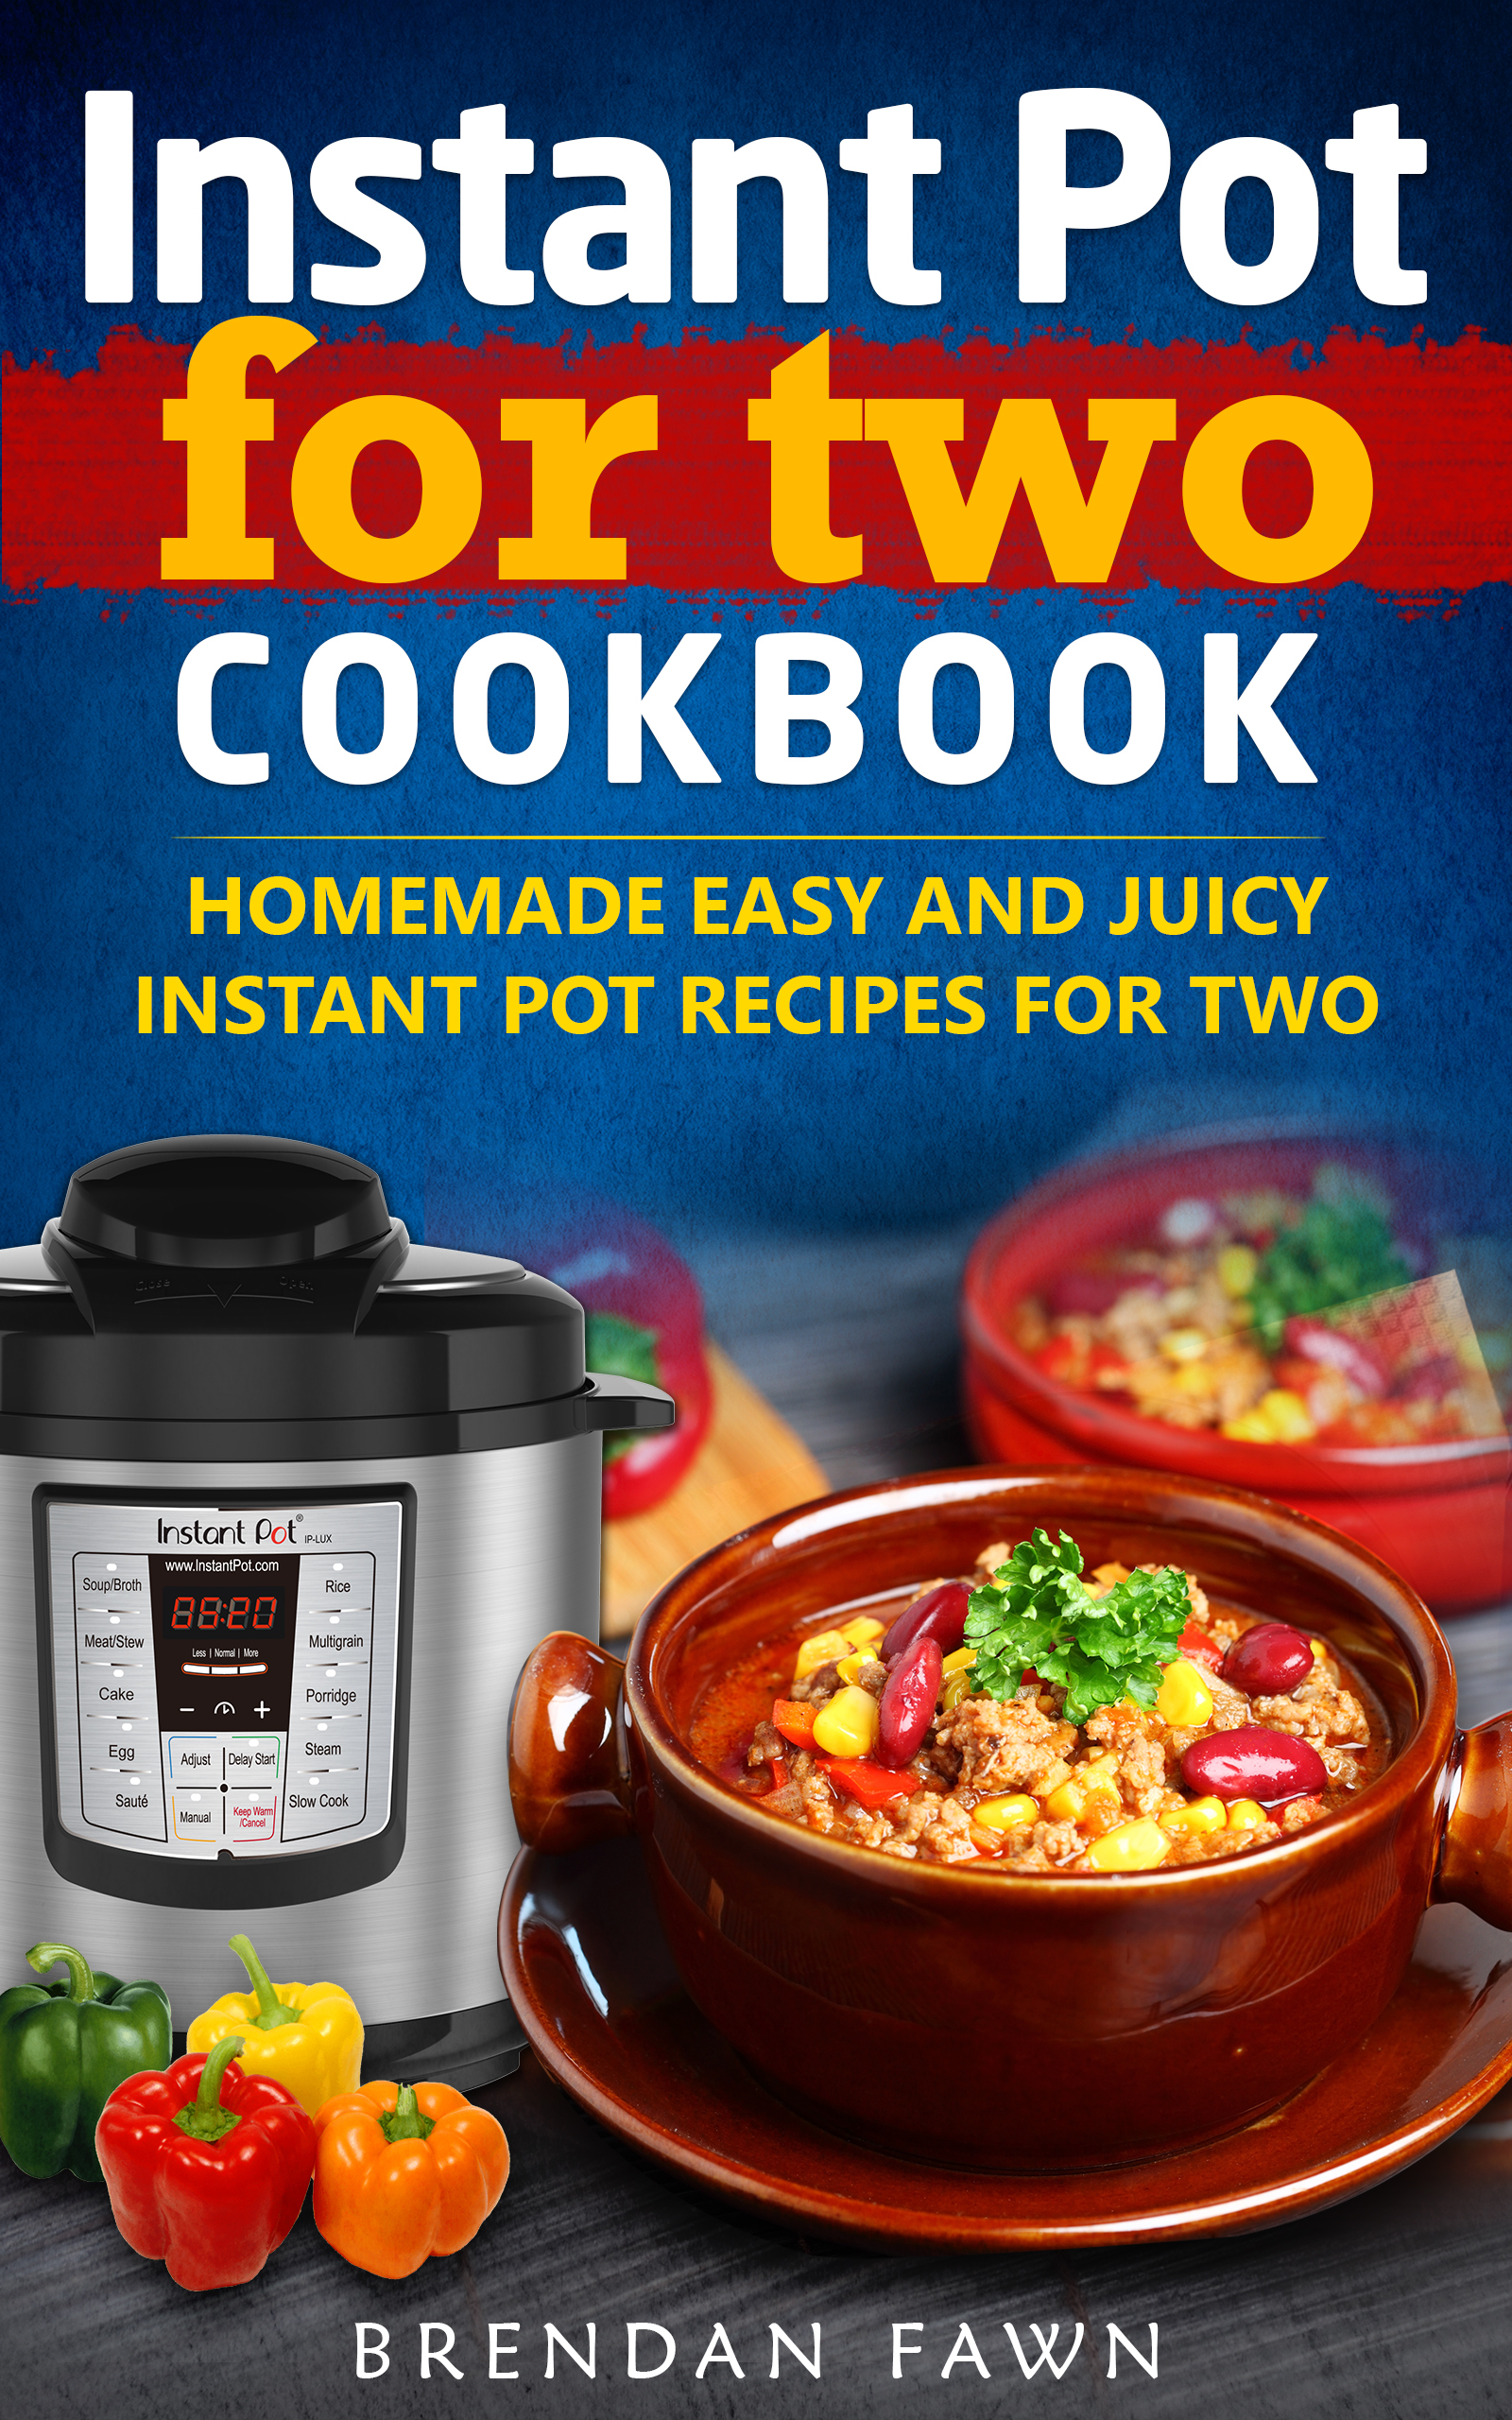 FREE: Instant Pot for Two Cookbook: Homemade Easy and Juicy Instant Pot Recipes for Two by Brendan Fawn